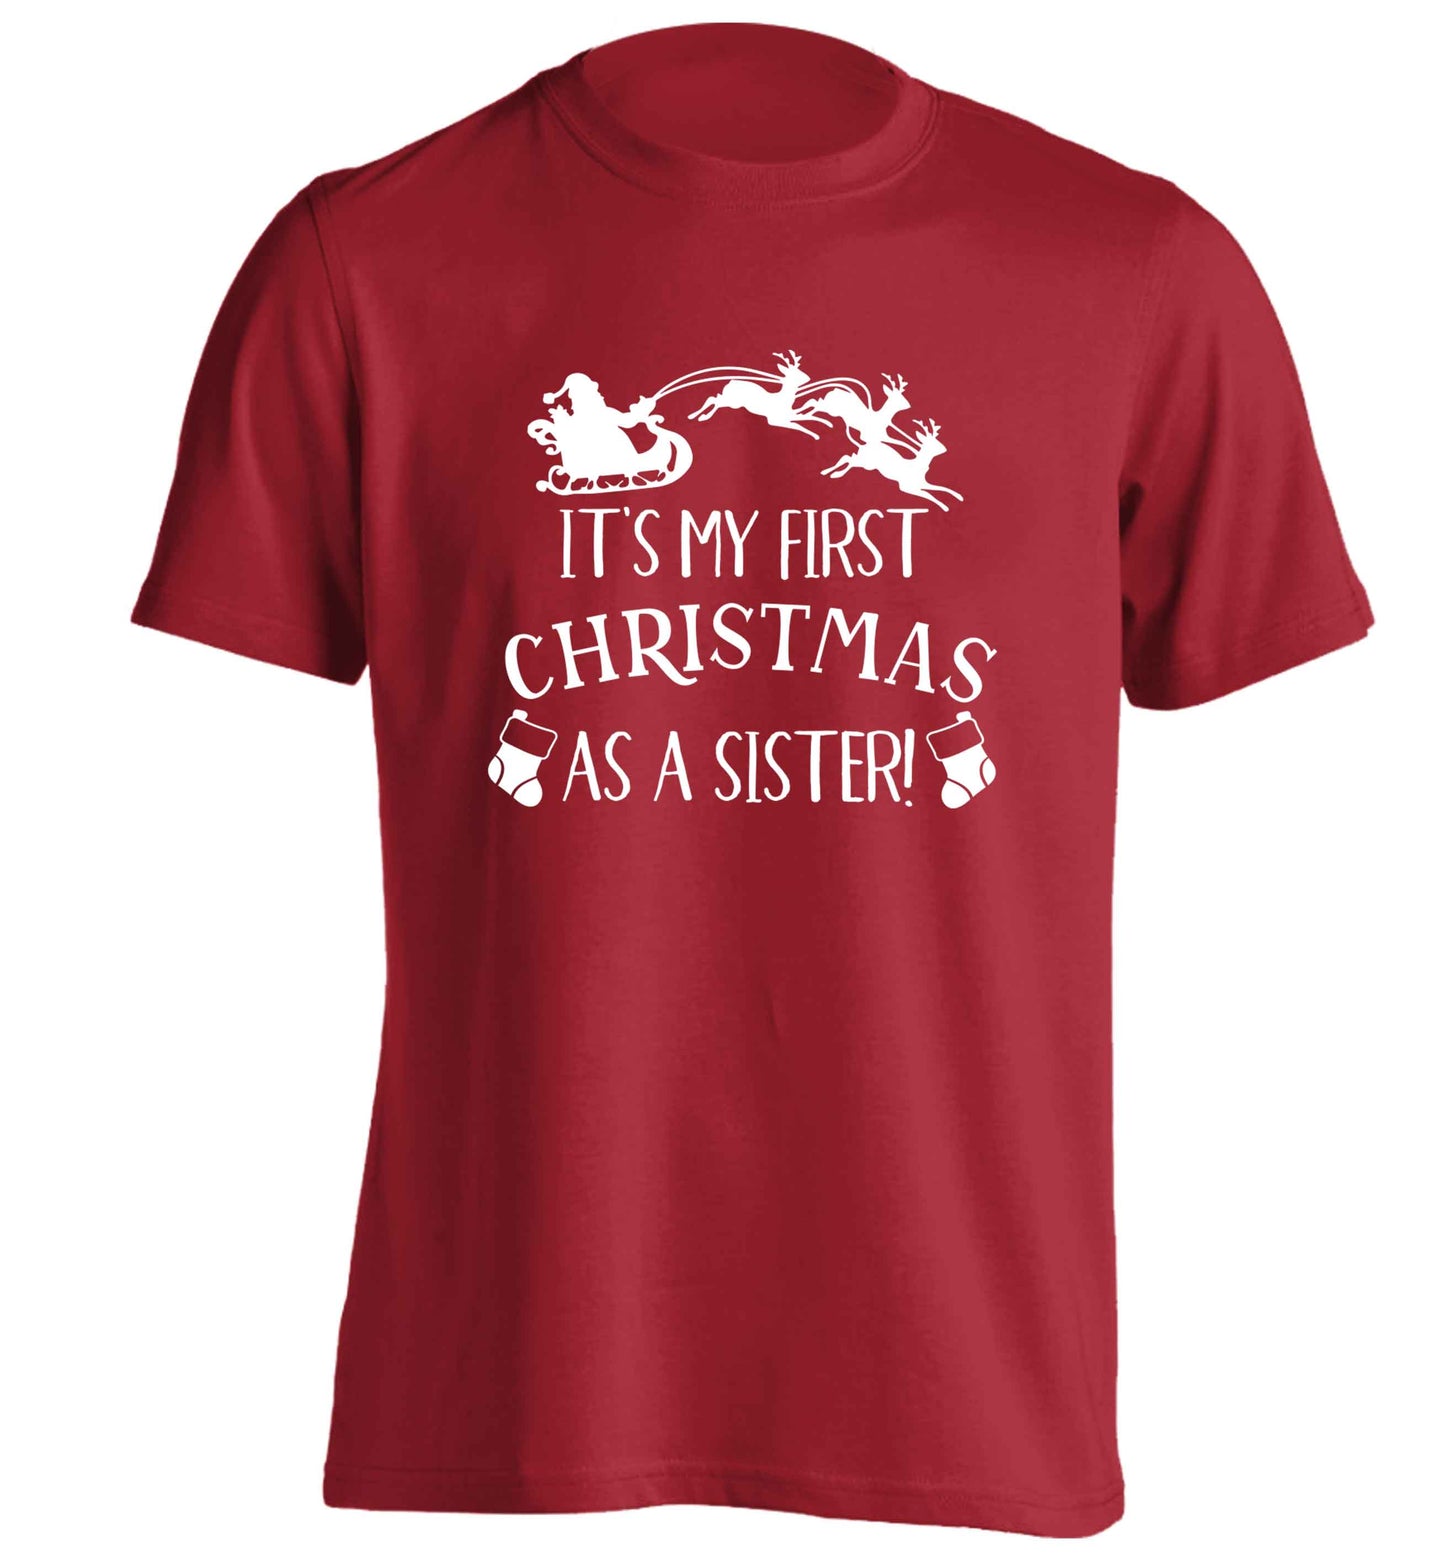 It's my first Christmas as a sister! adults unisex red Tshirt 2XL